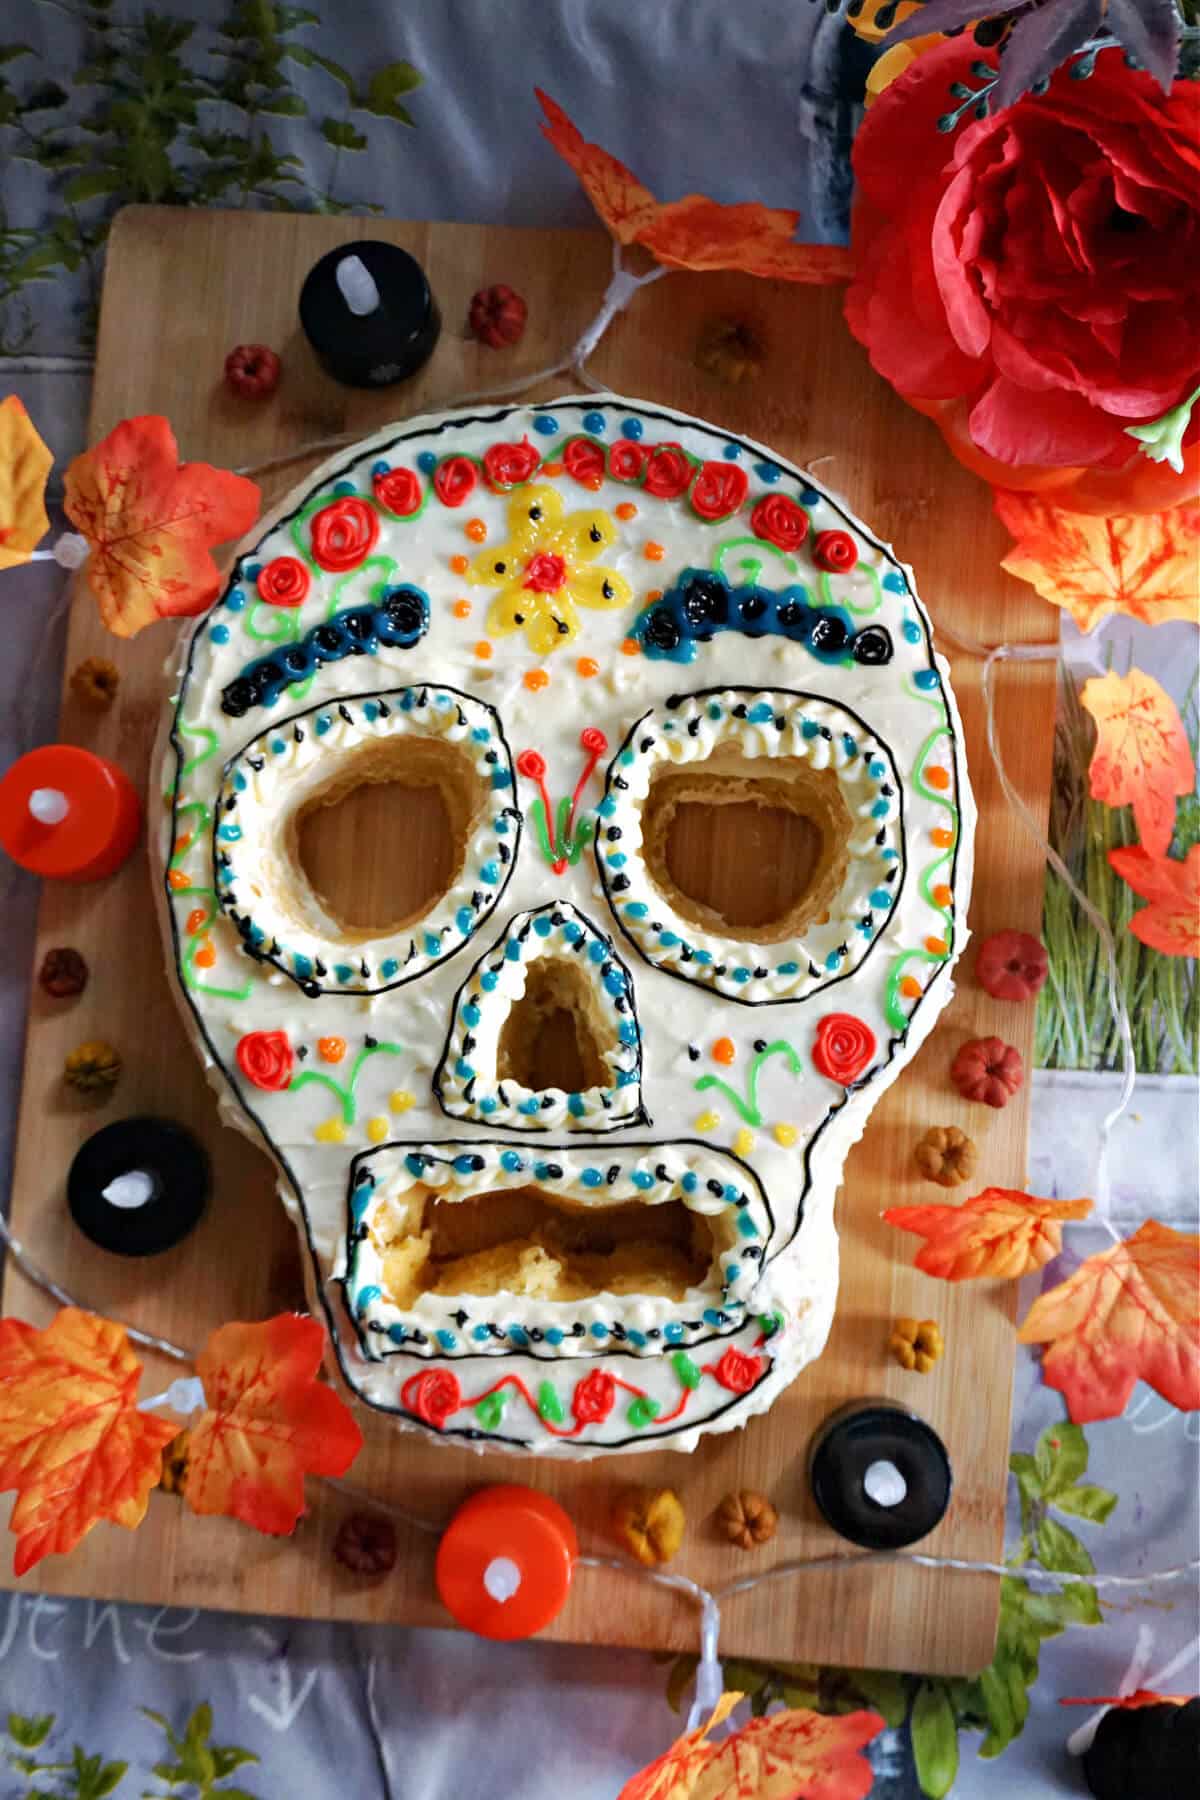 A Day of the Dead Cake on a wooden board with decorations.